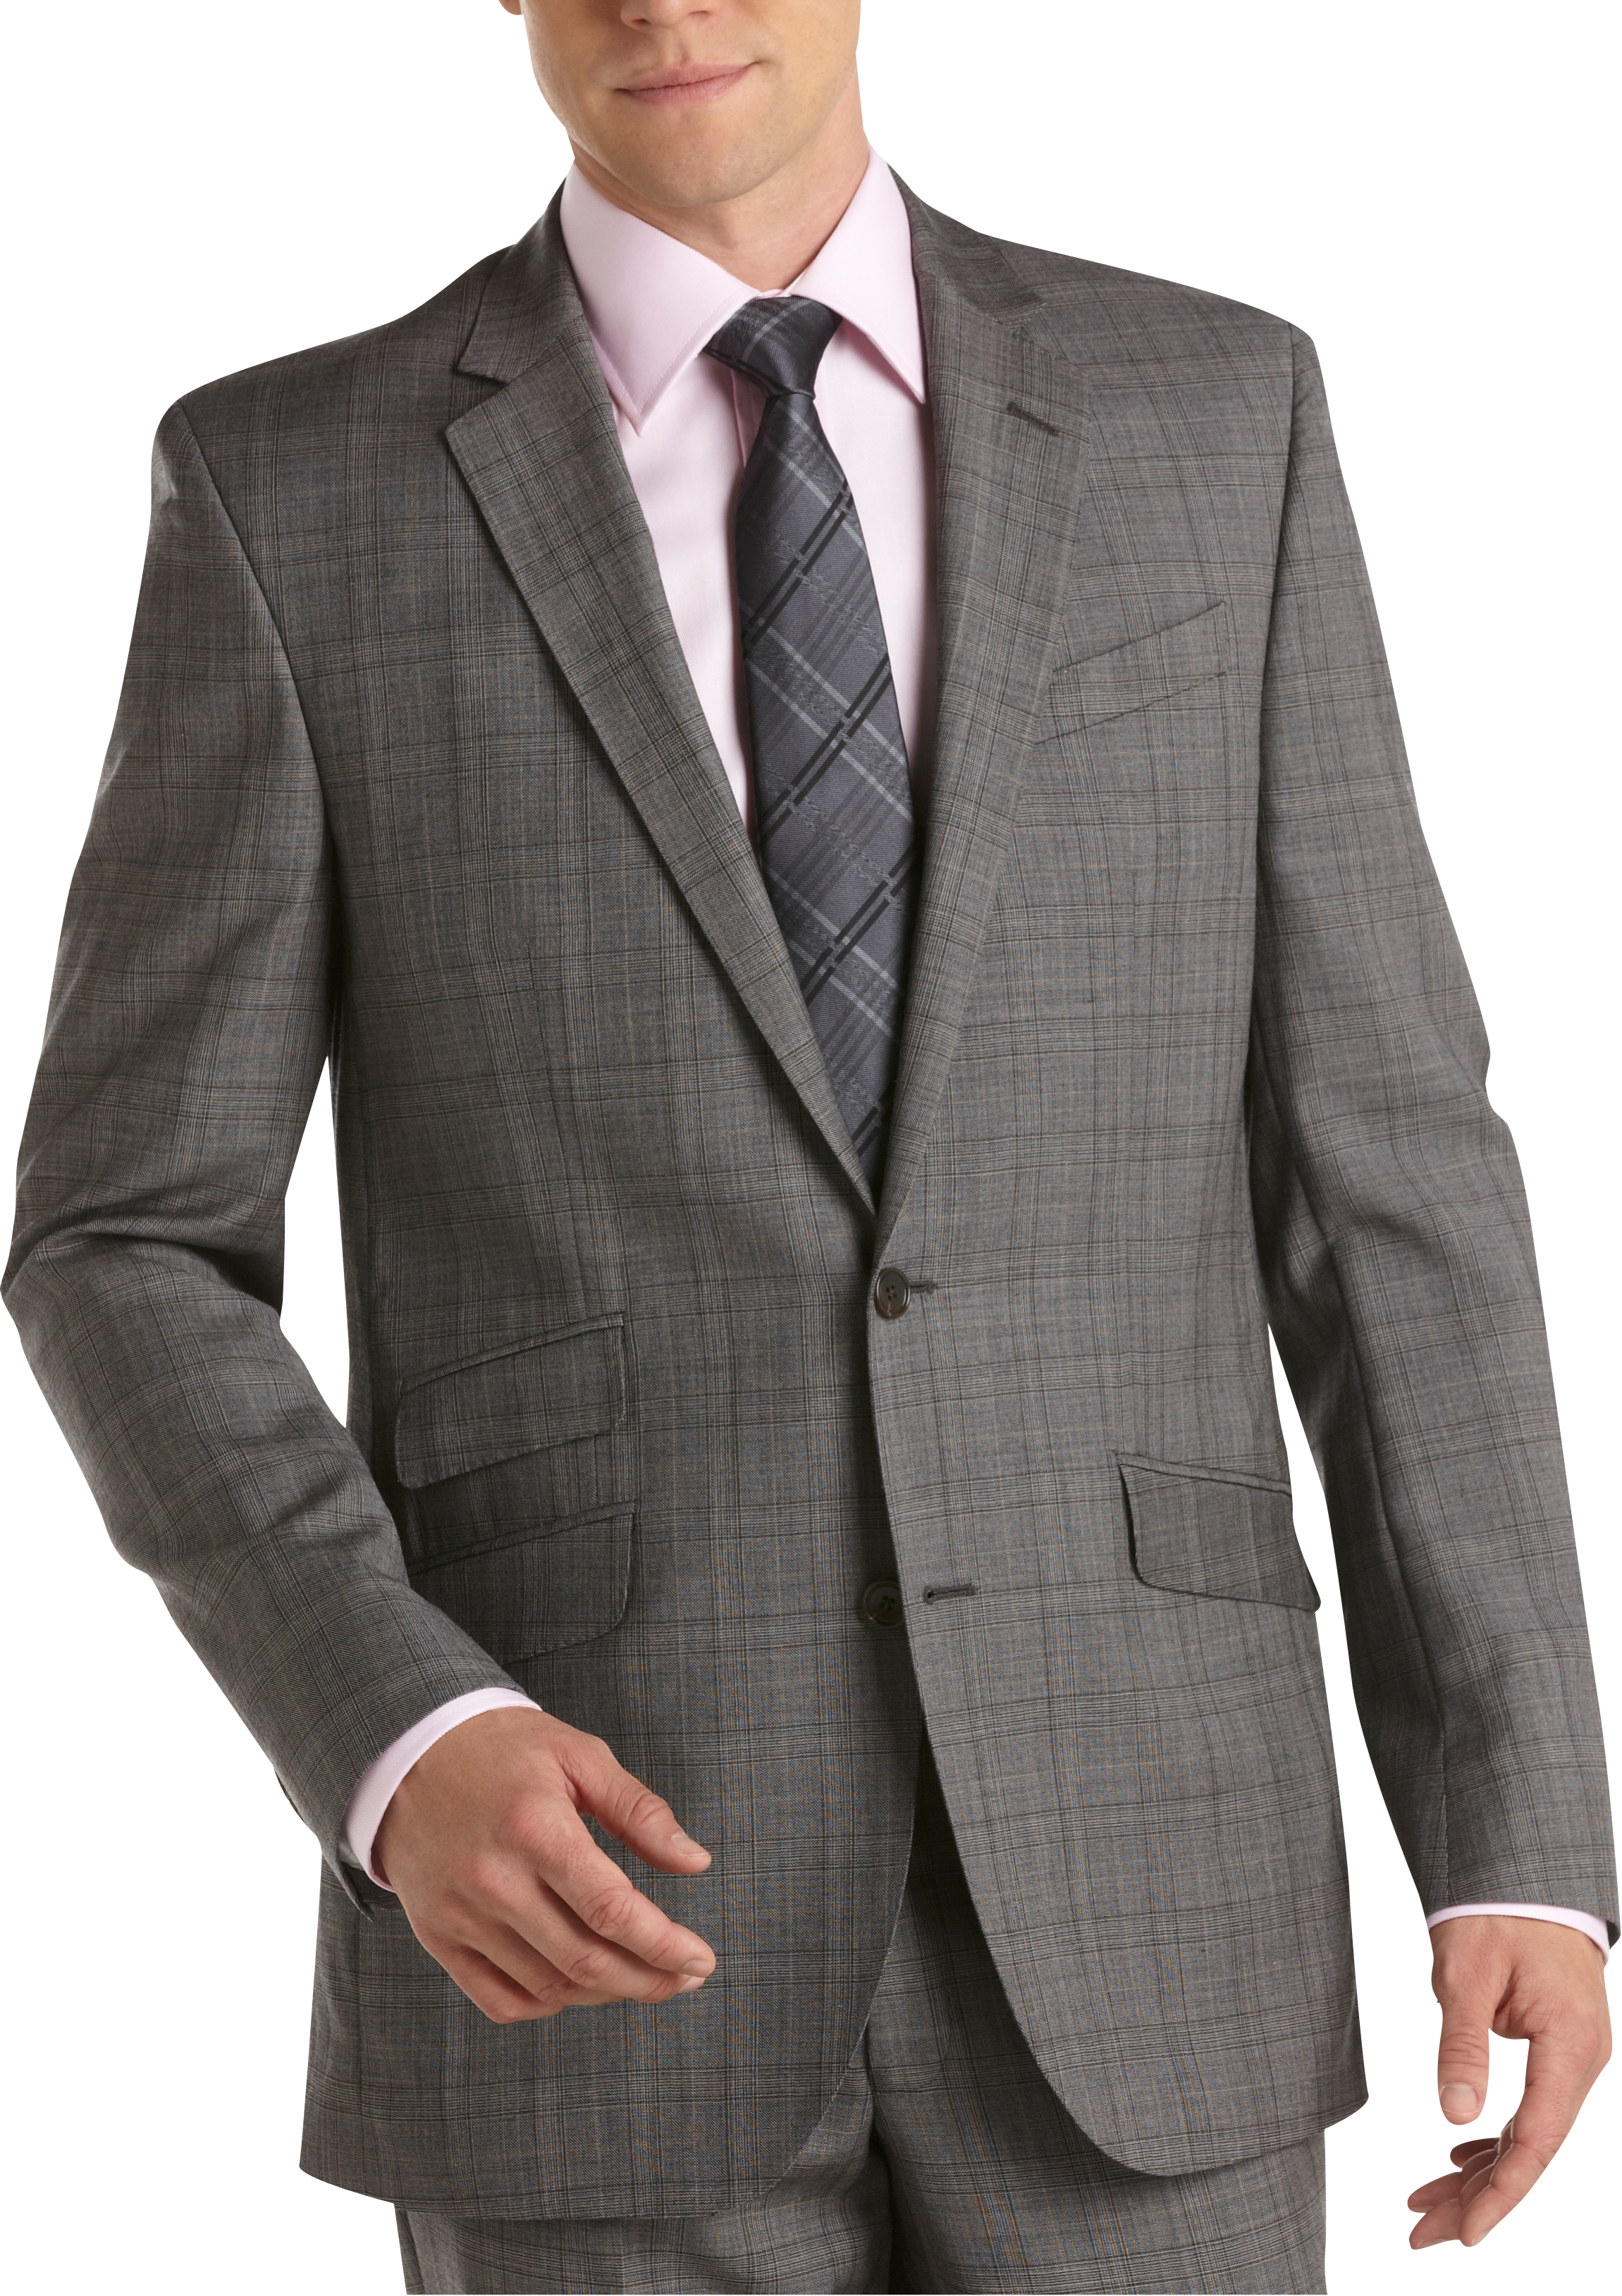 Kenneth Cole New York Gray Plaid Slim Fit Suit